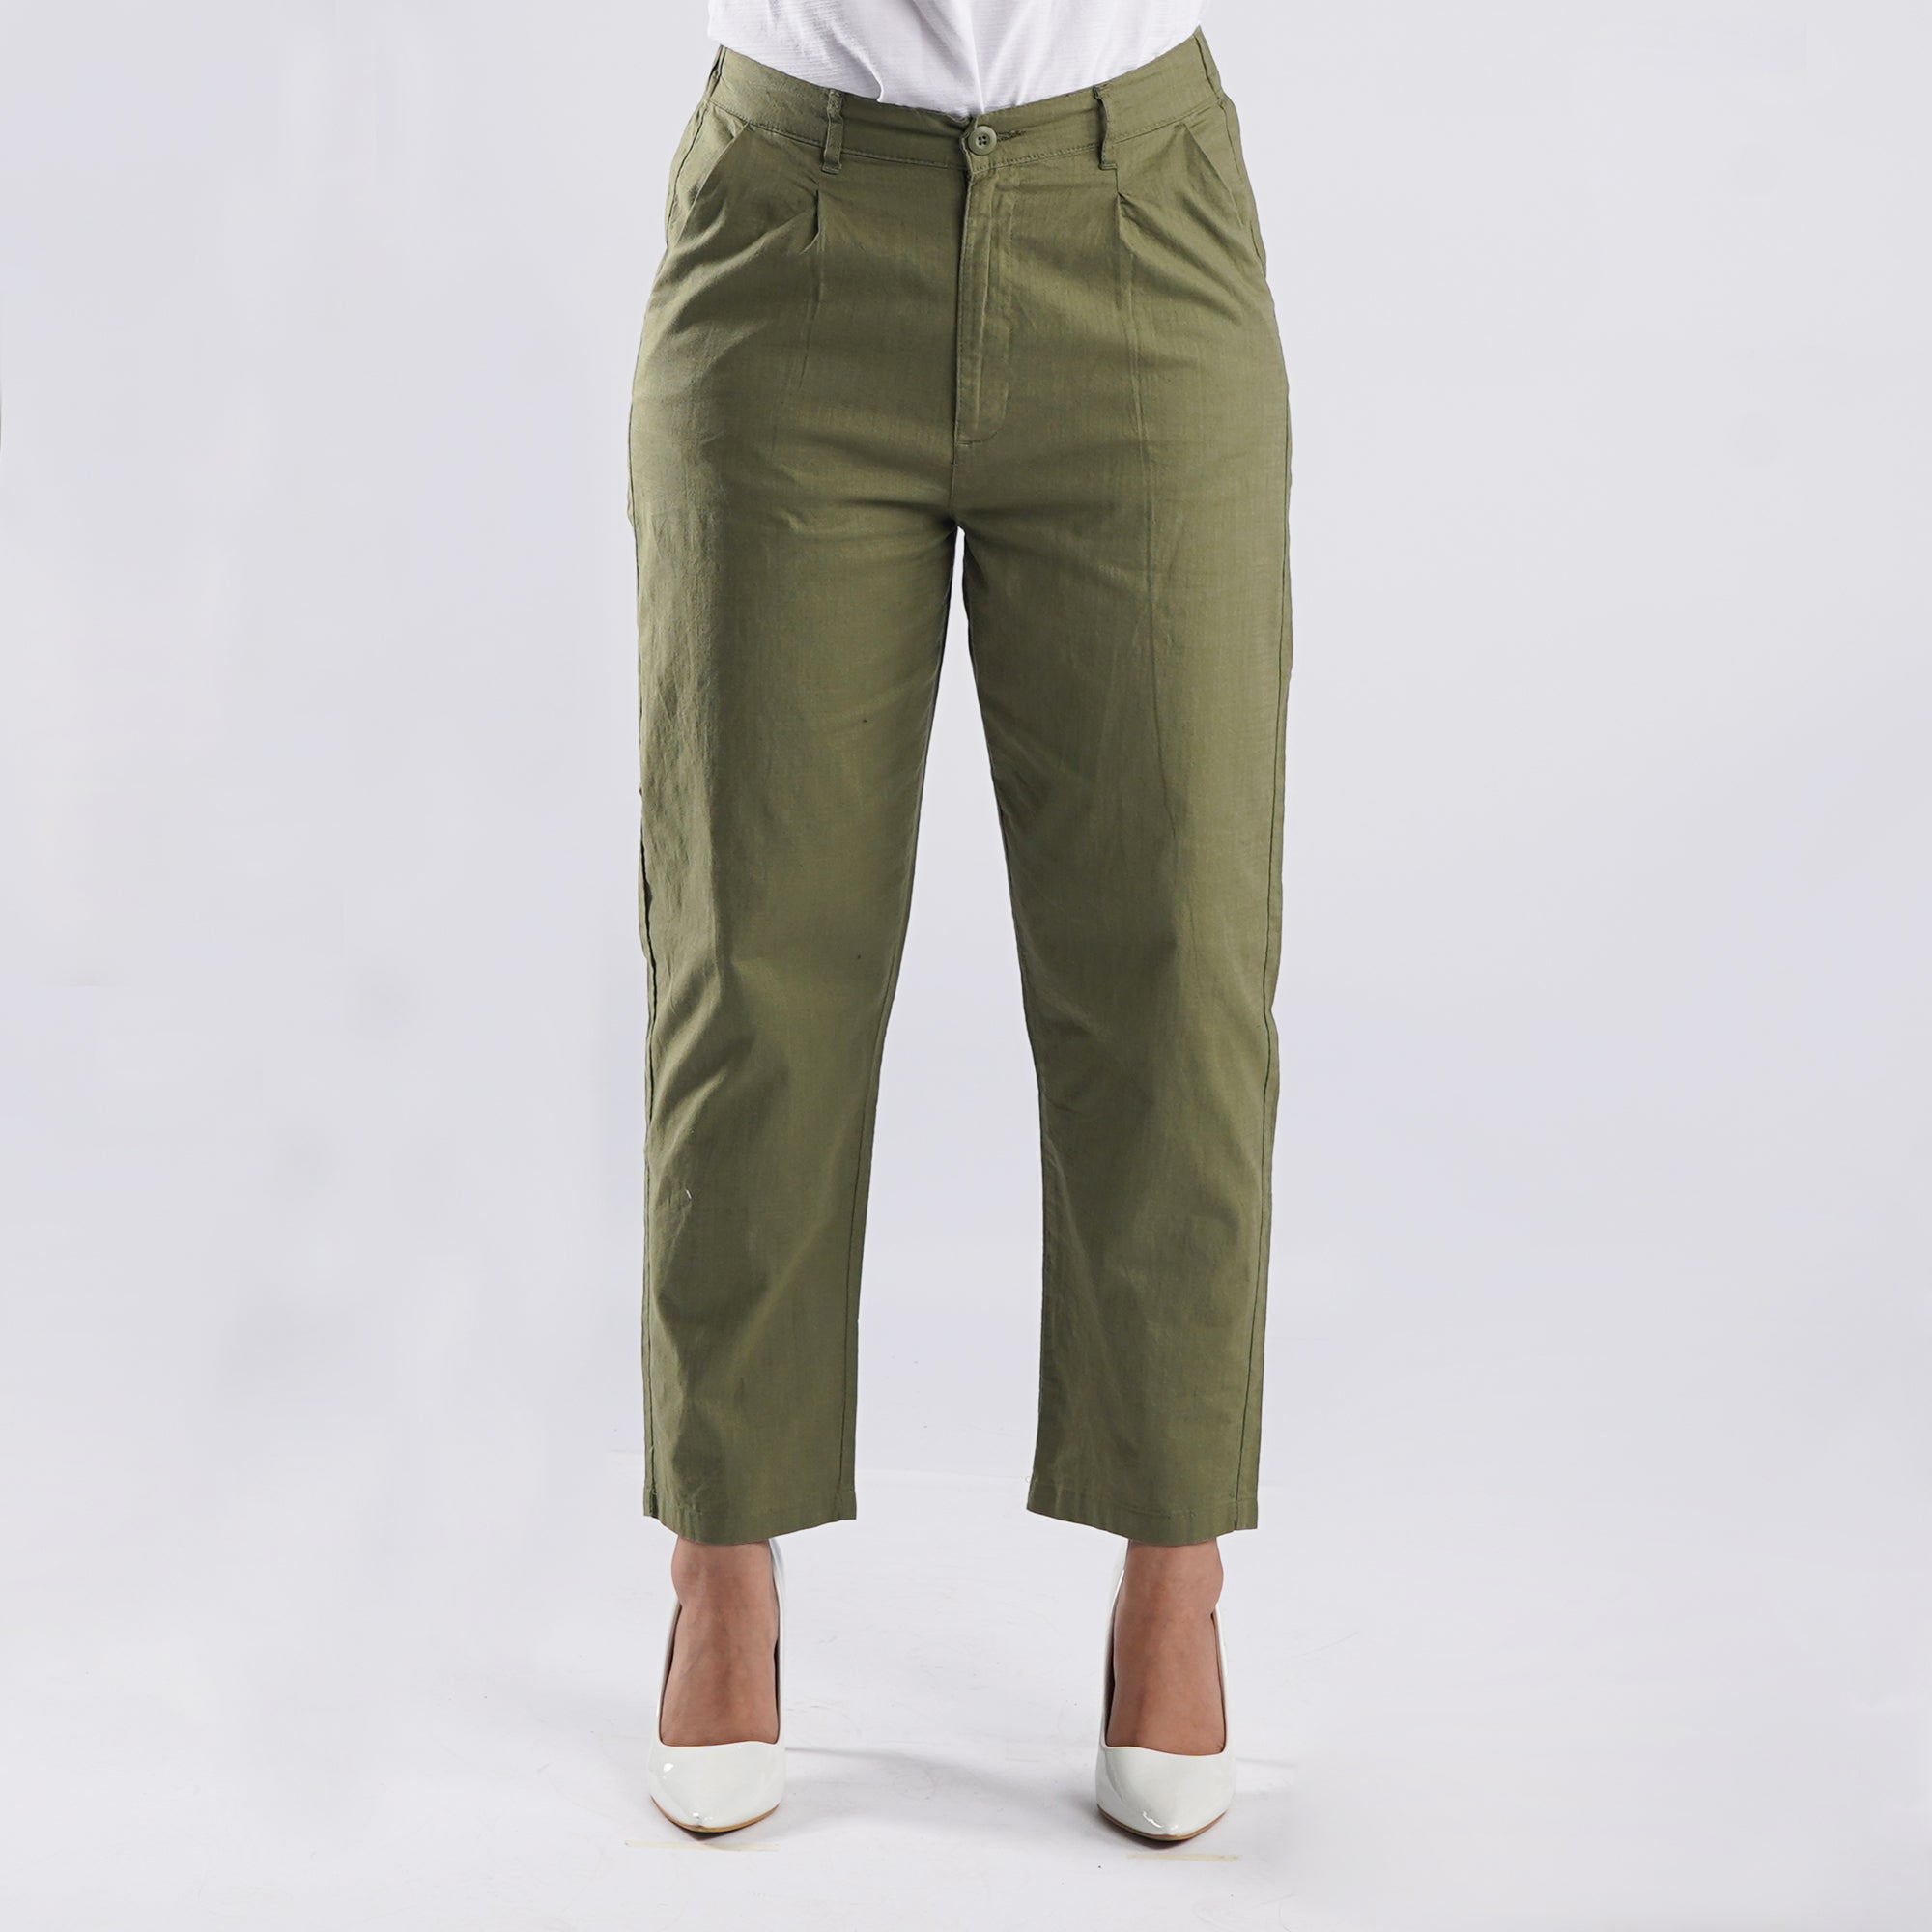 CASUAL PANTS FOR WOMEN/STYLISH COMBO PANTS FOR WOMEN/CIGARETTE PANTS/  STRAIGHT FIT PANTS/SOLID PANTS/OFFICE PANTS FOR WOMEN /KURTI PANTS FOR WOMEN